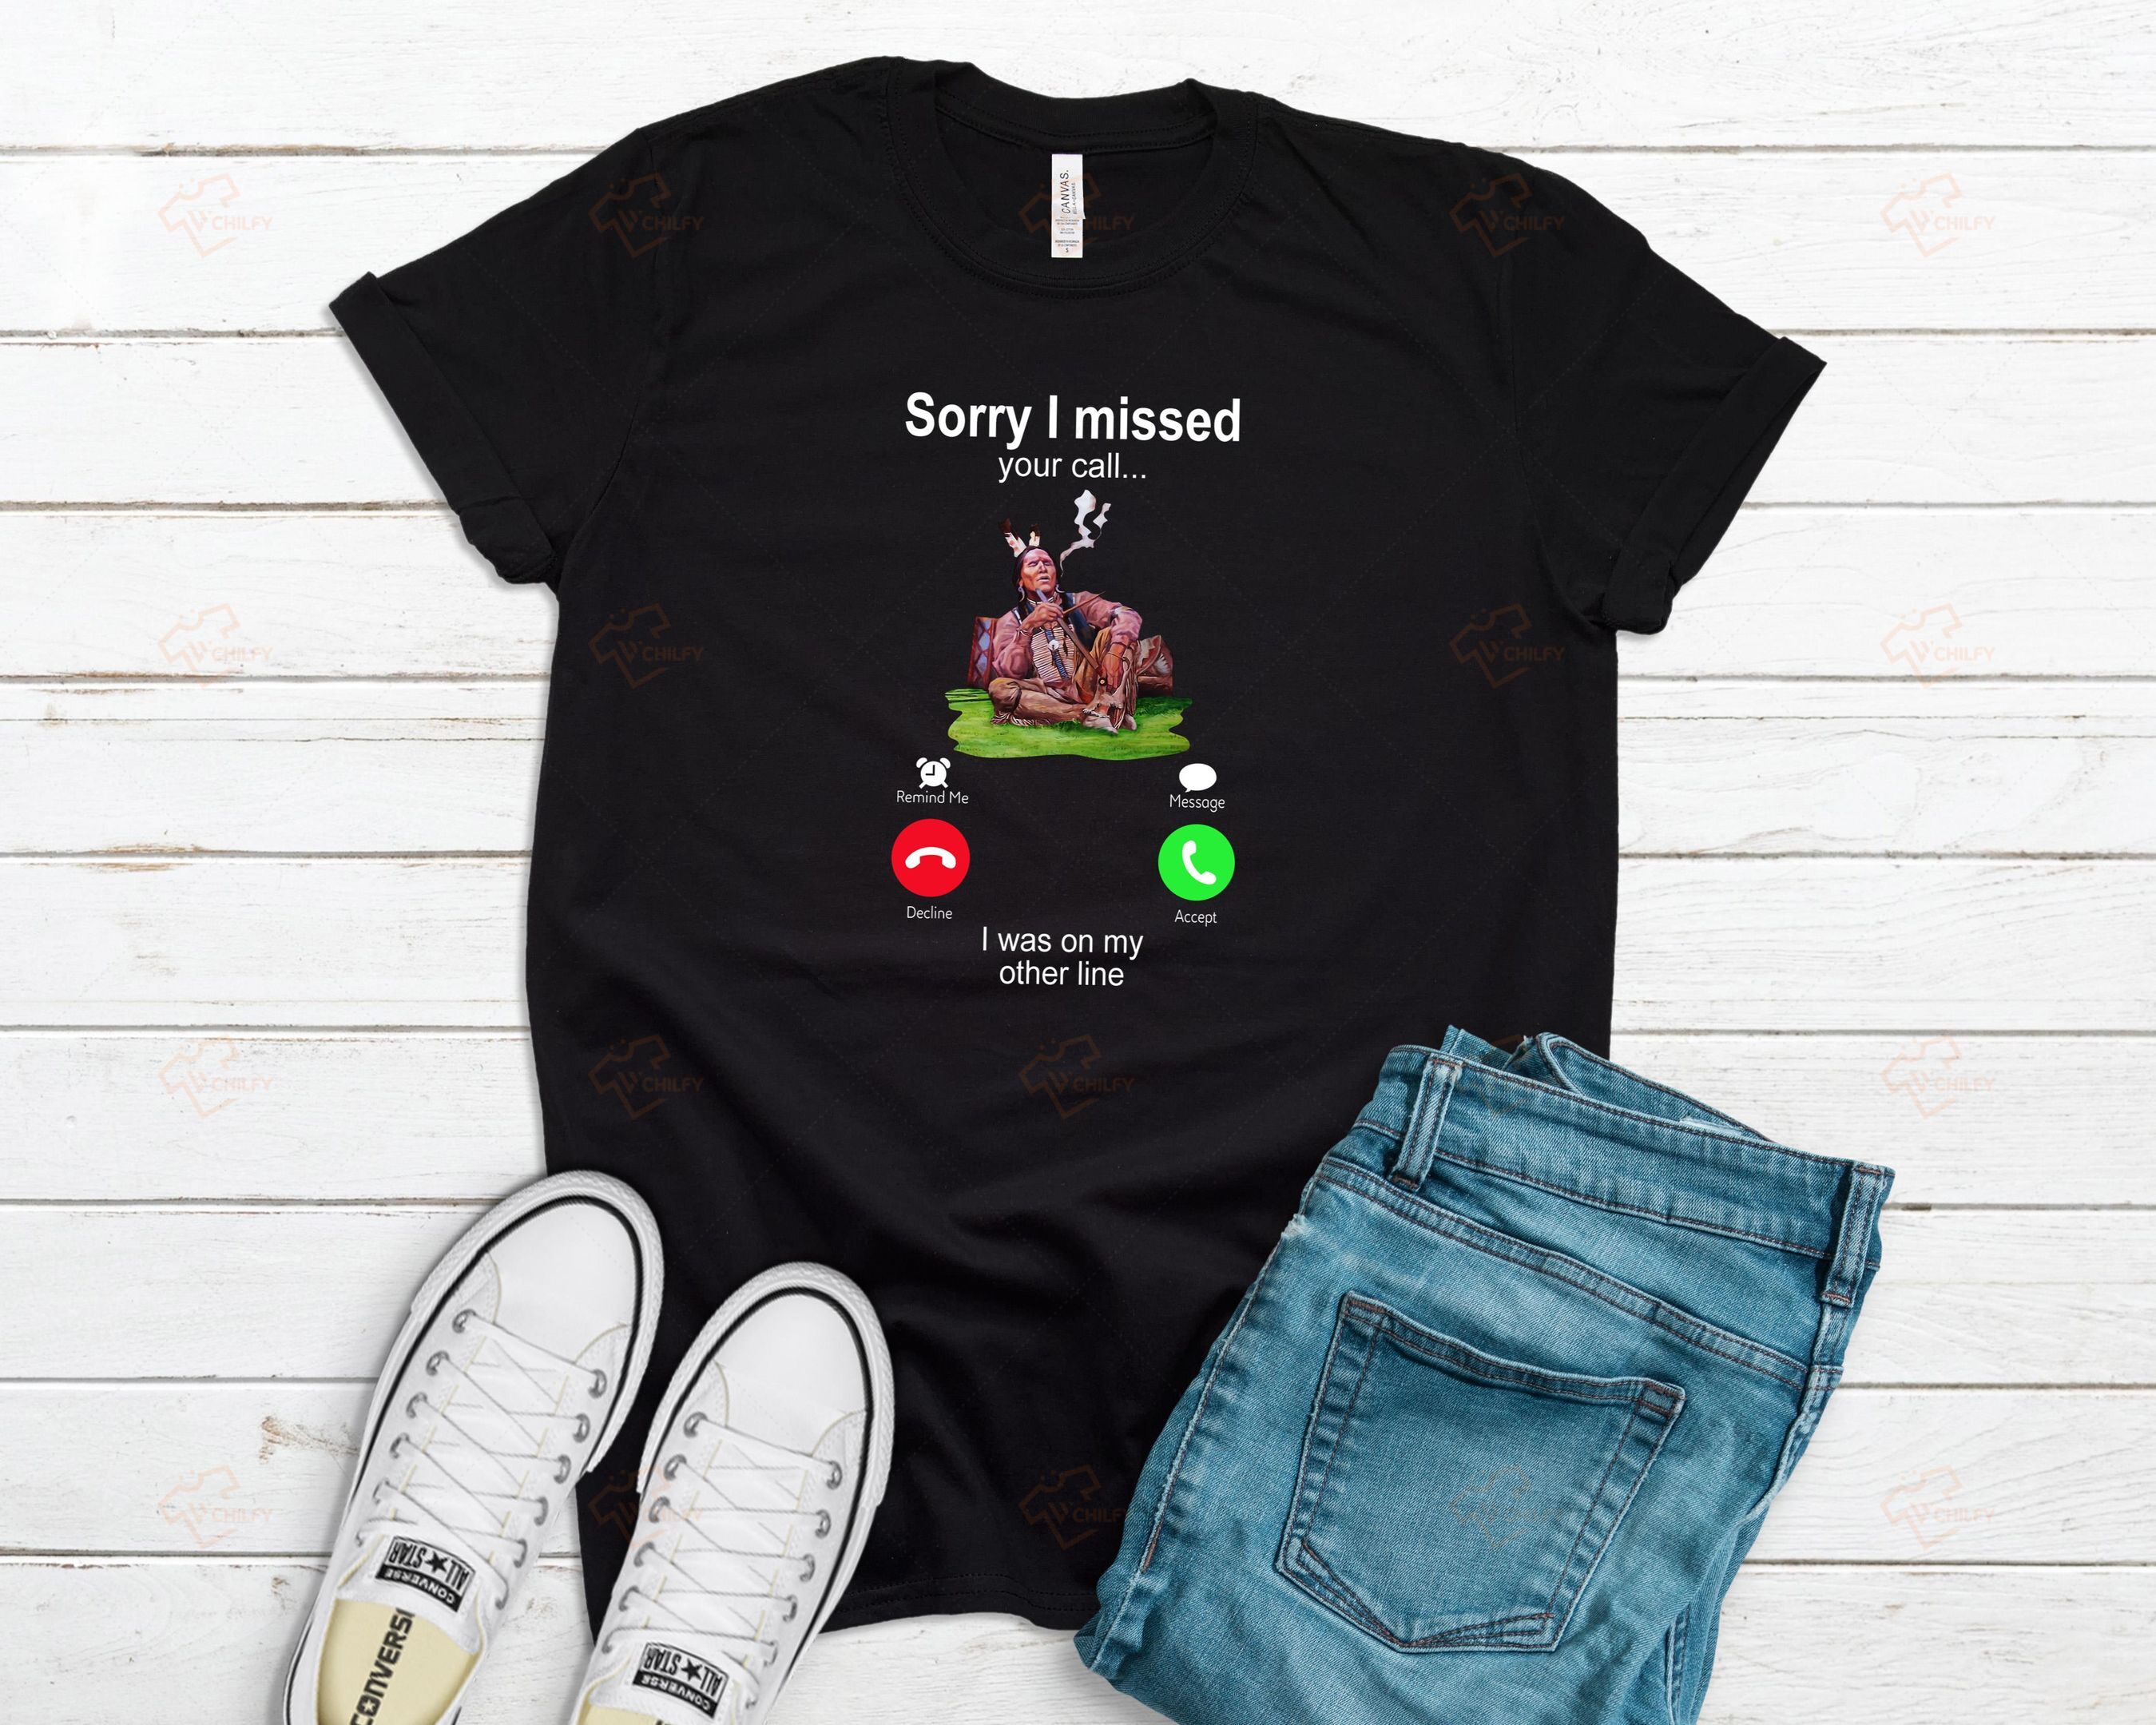 Sorry i missed your call i was on my other line shirt, badass Native t shirt, Native American shirt, gift for Indigenous people